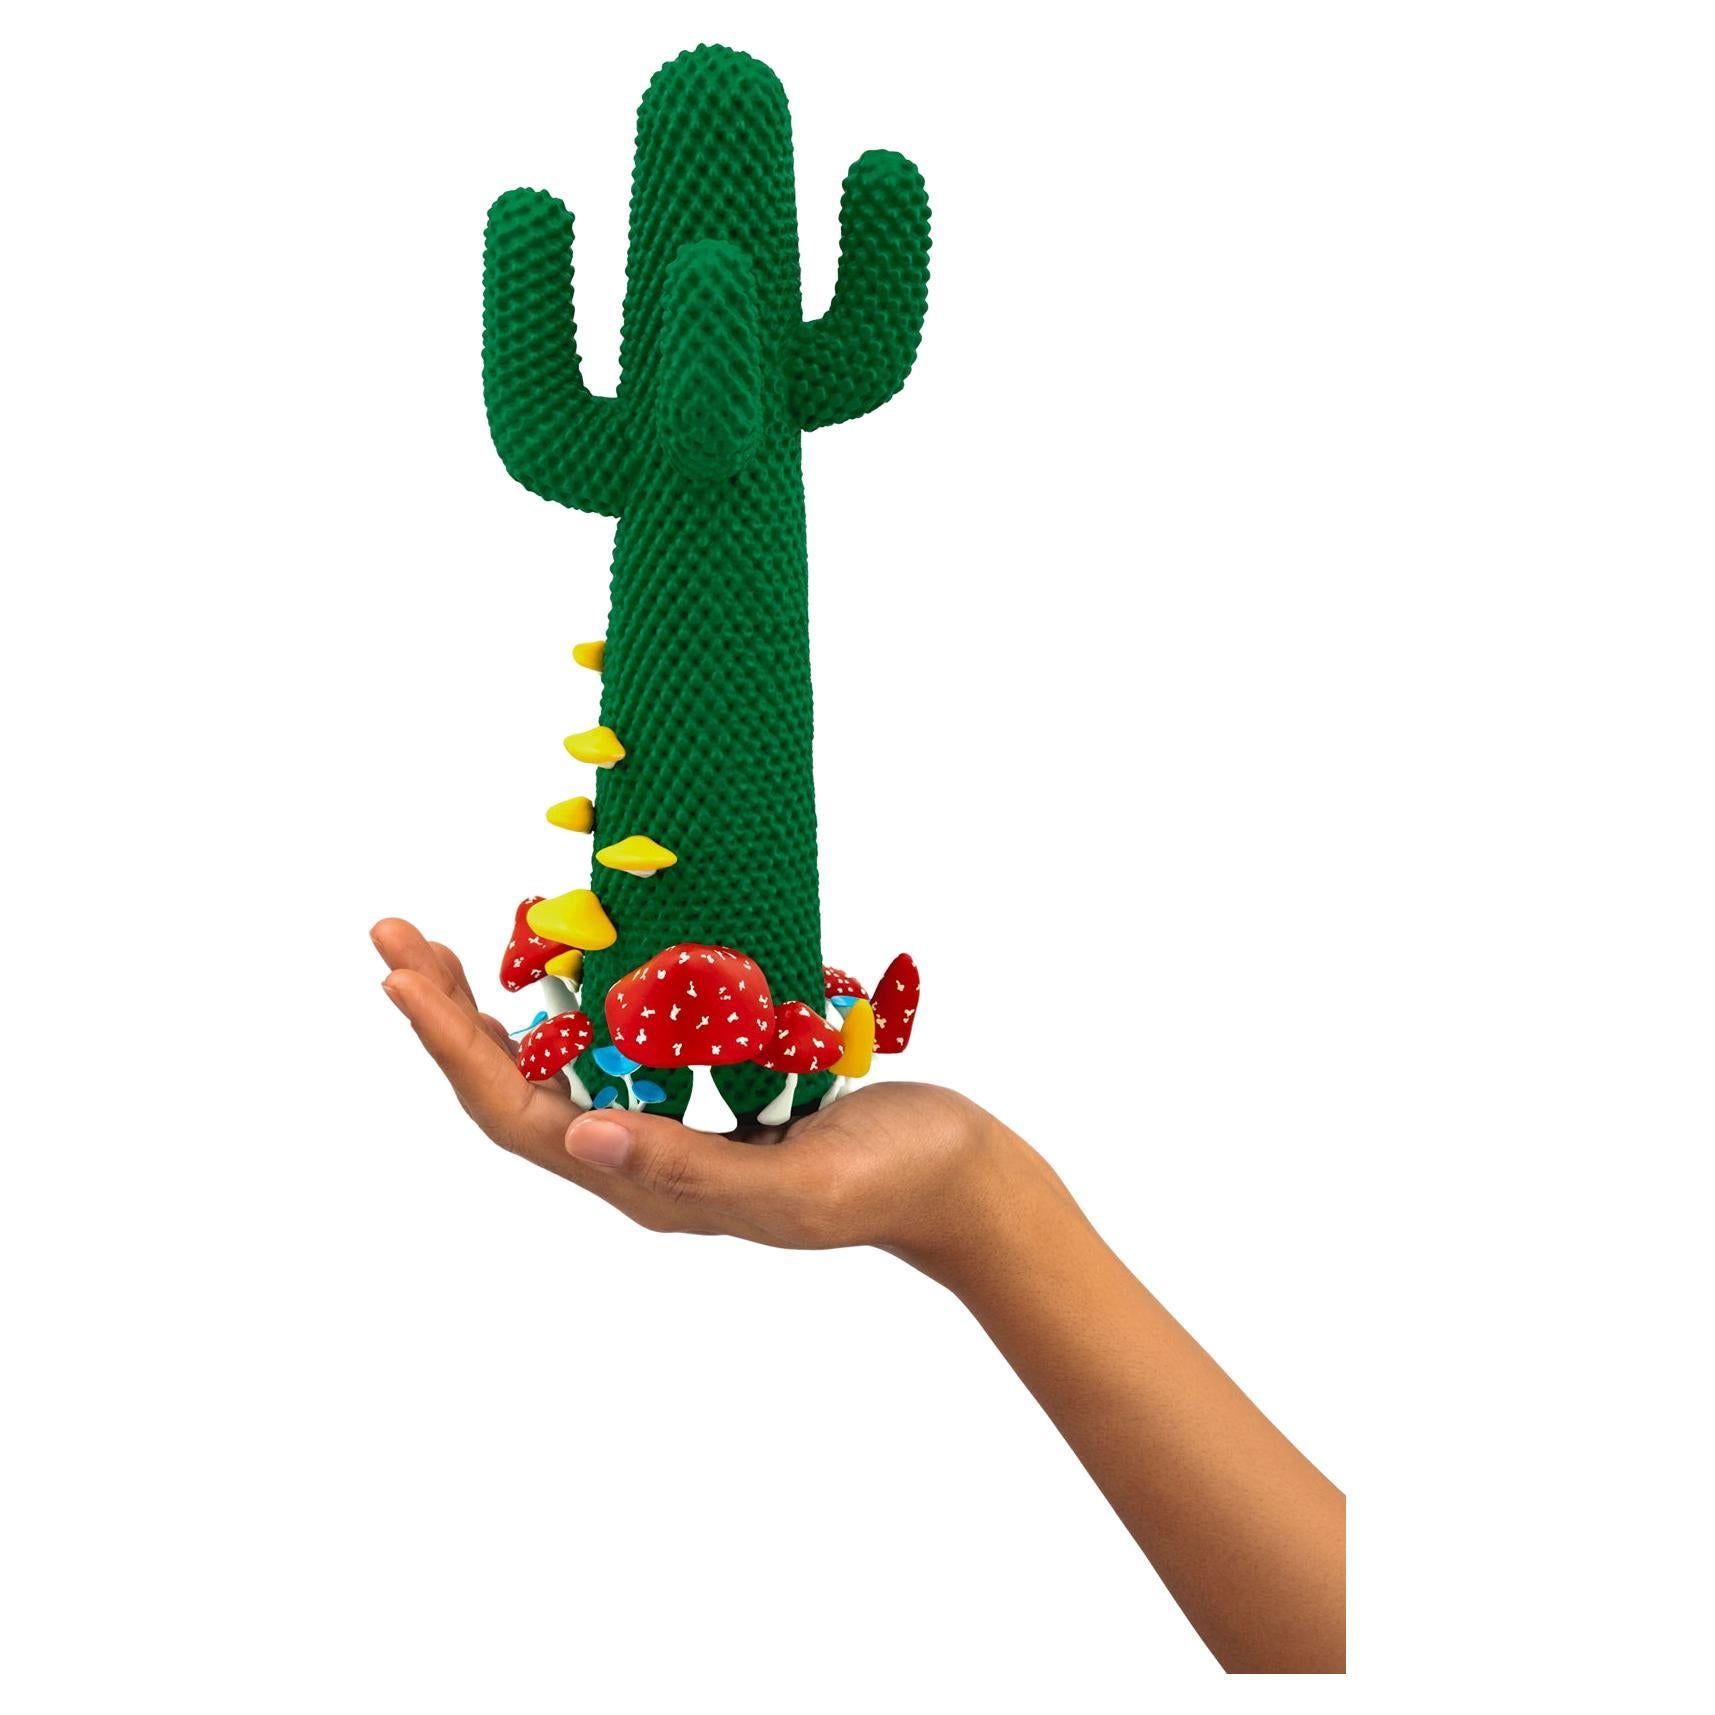 Limited Edition #30/99

Gufram presents the miniaturised version of the Shroom CACTUS® created in collaboration with A$AP Rocky and the artist’s new design studio HOMMEMADE Exactly as the real-size Shroom CACTUS®, the new Guframini piece features